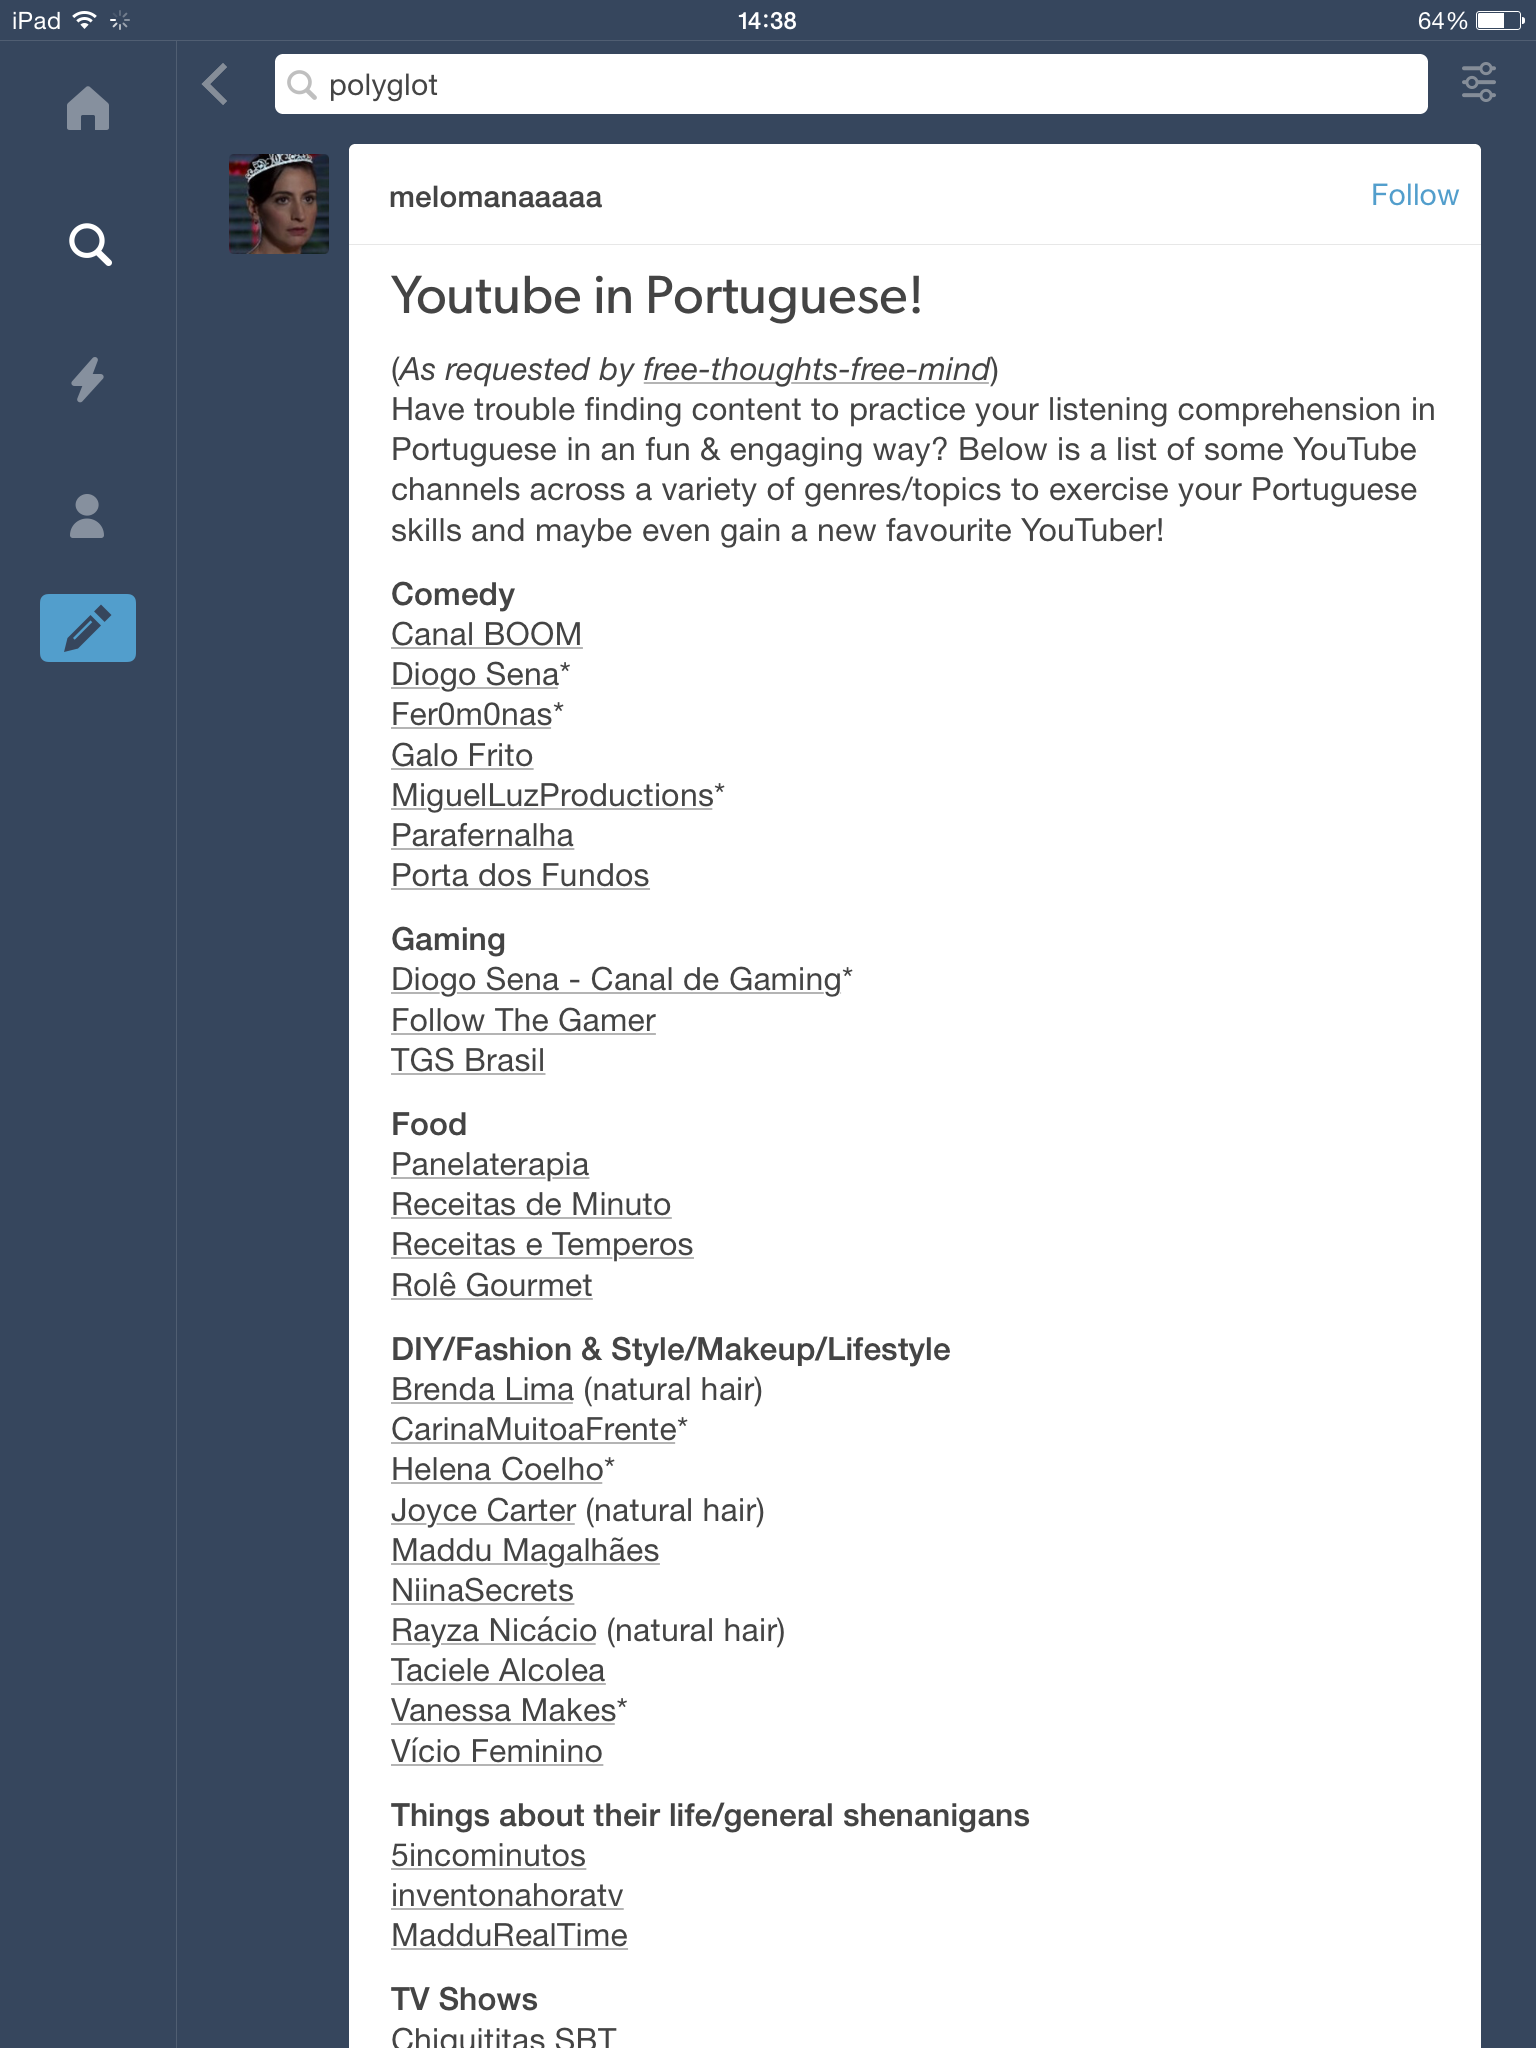 How To Learn A Language With Thousands Of Helpers On Tumblr By Fluent Language